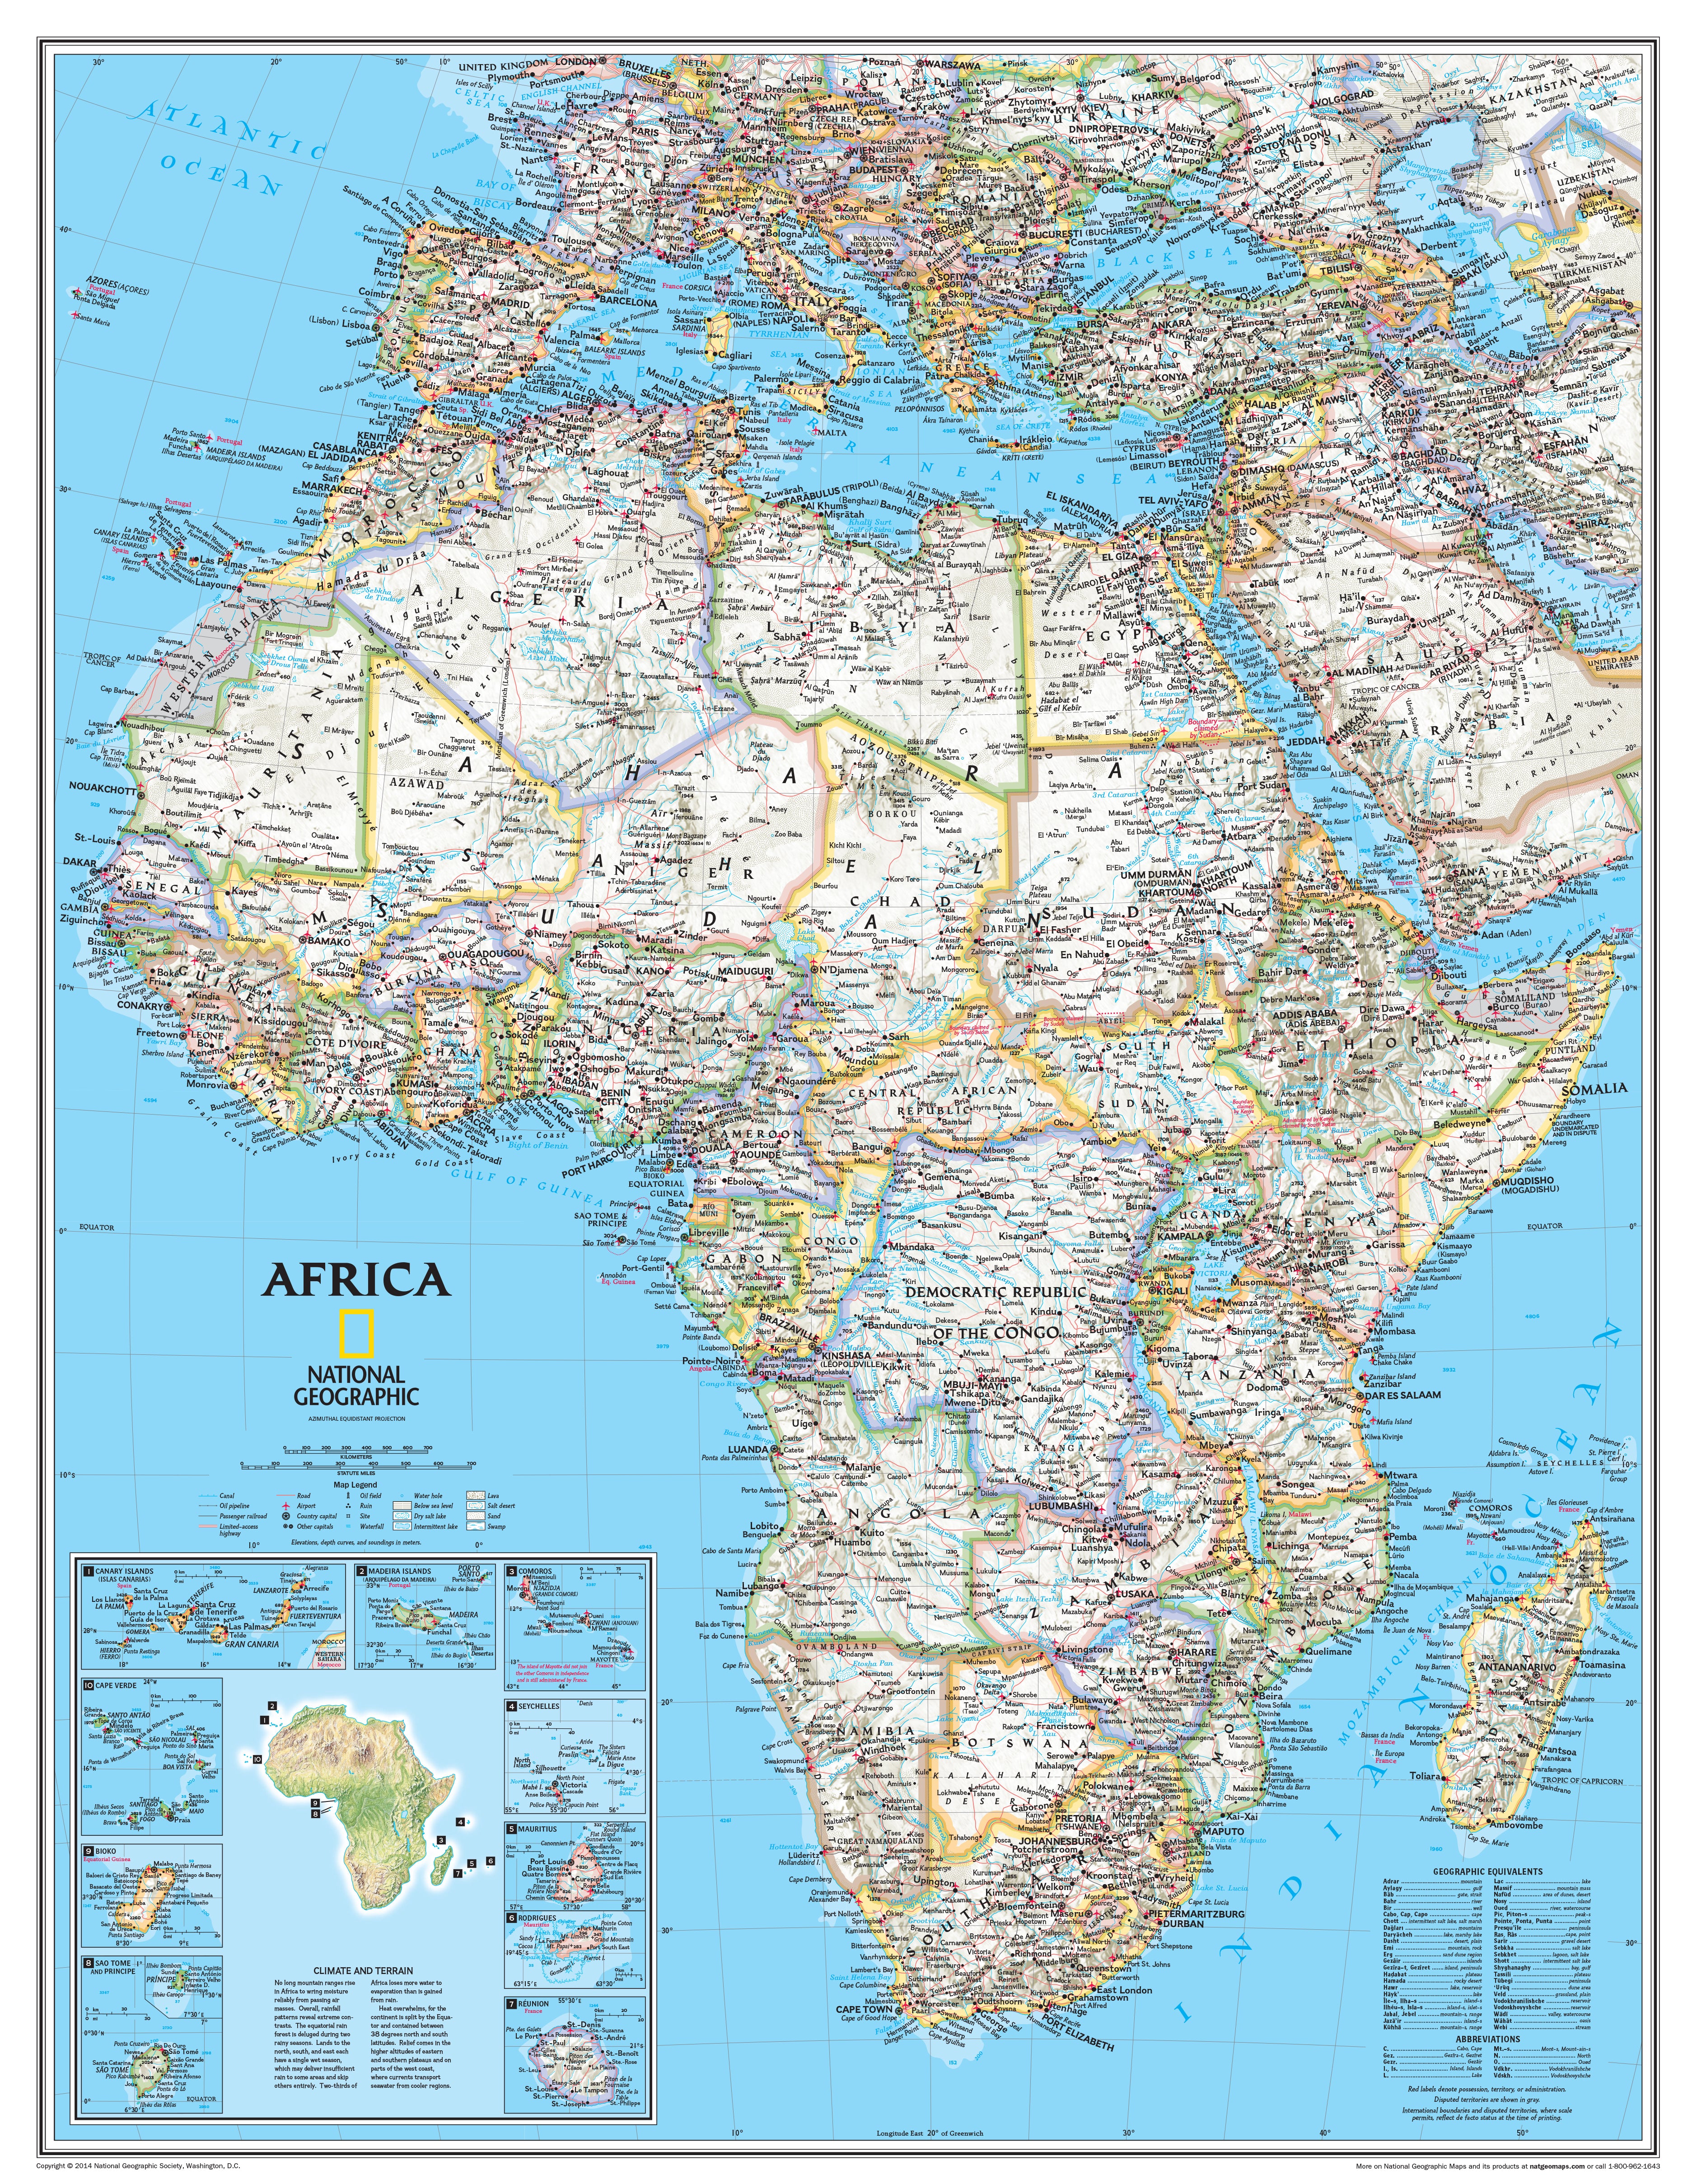 Africa a part of National Geographic World and 6 Continent Maps Classroom Pull Down 7 Map Educational Bundle